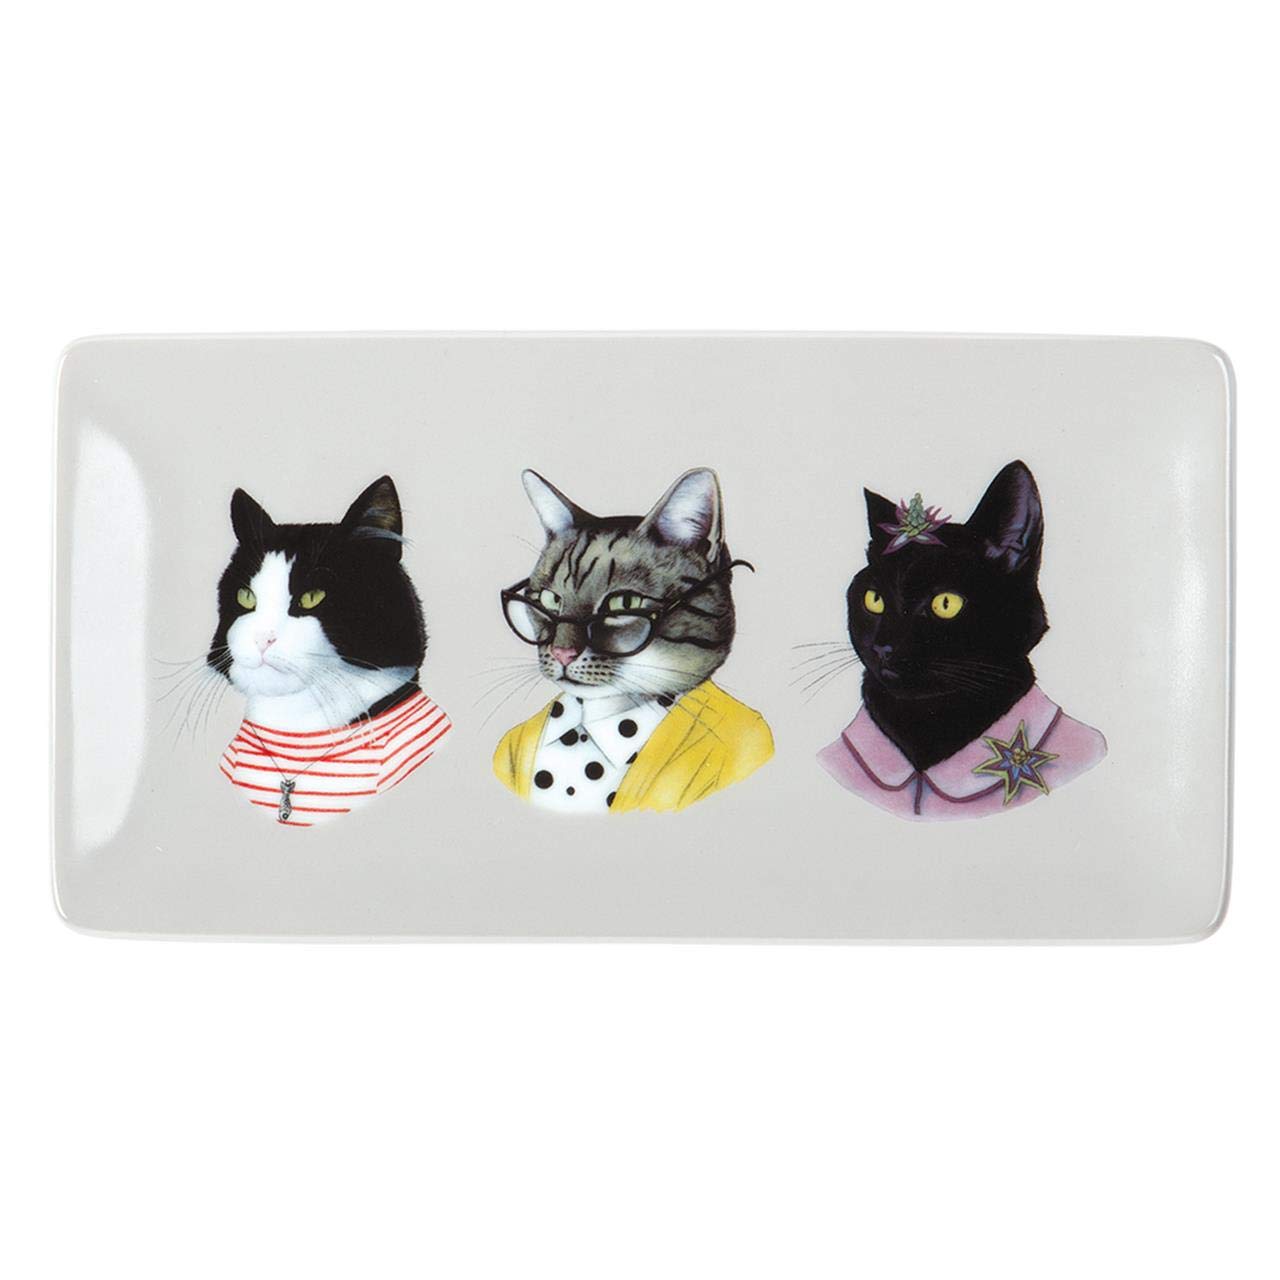 Berkley Bestiary Cat  Porcelain Tray - Out of the Blue